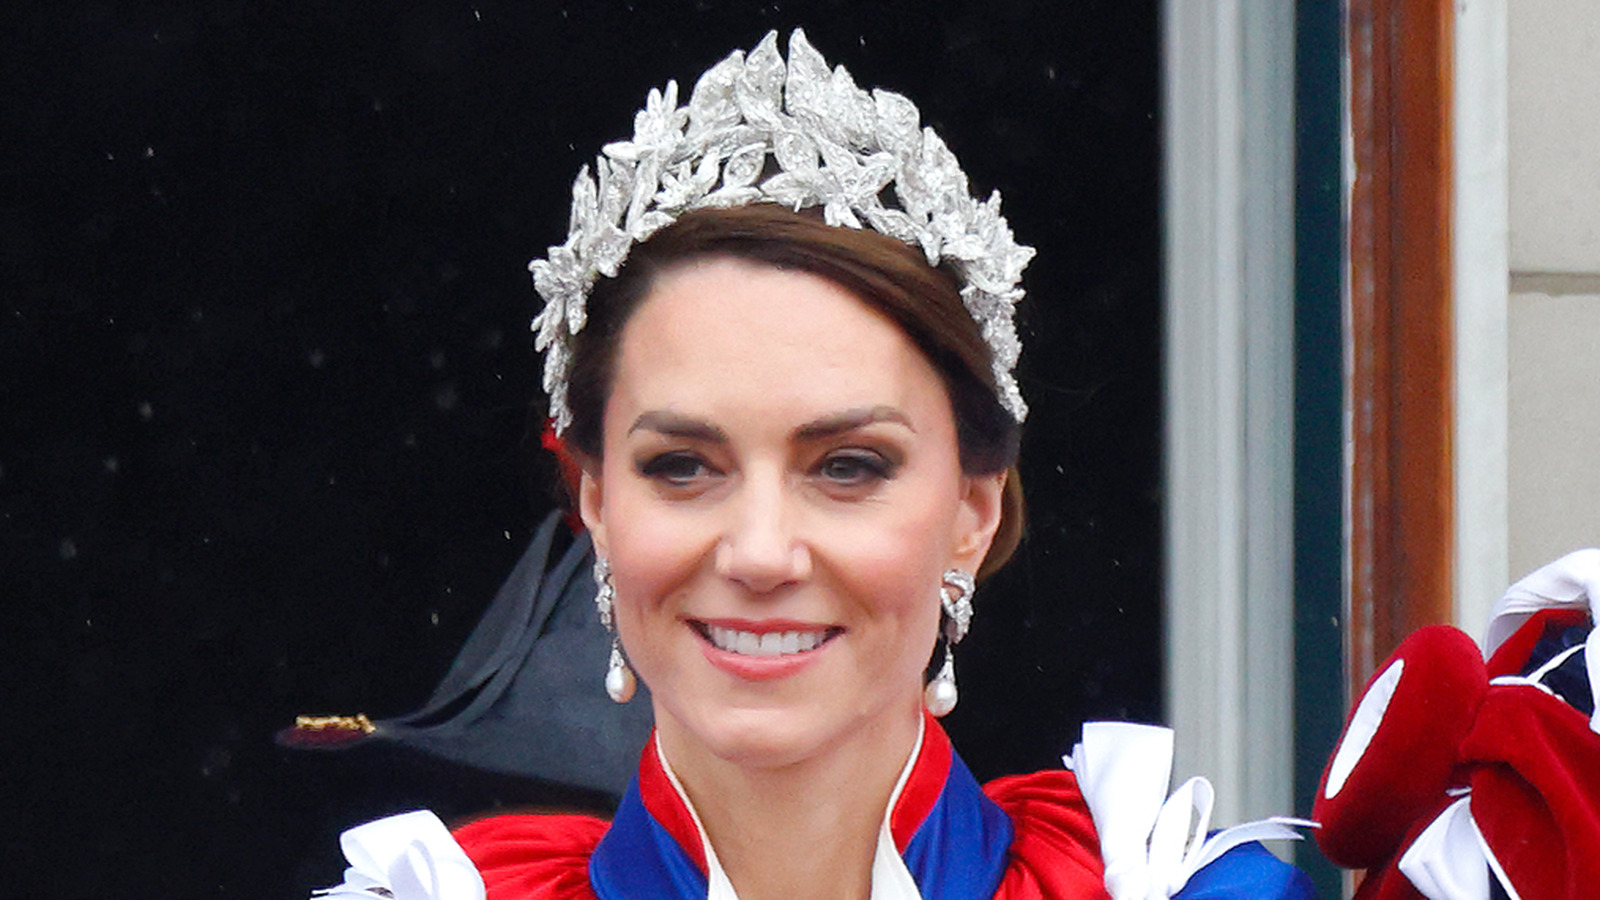 Will Kate Middleton Become Queen Or Queen Consort When Prince William ...